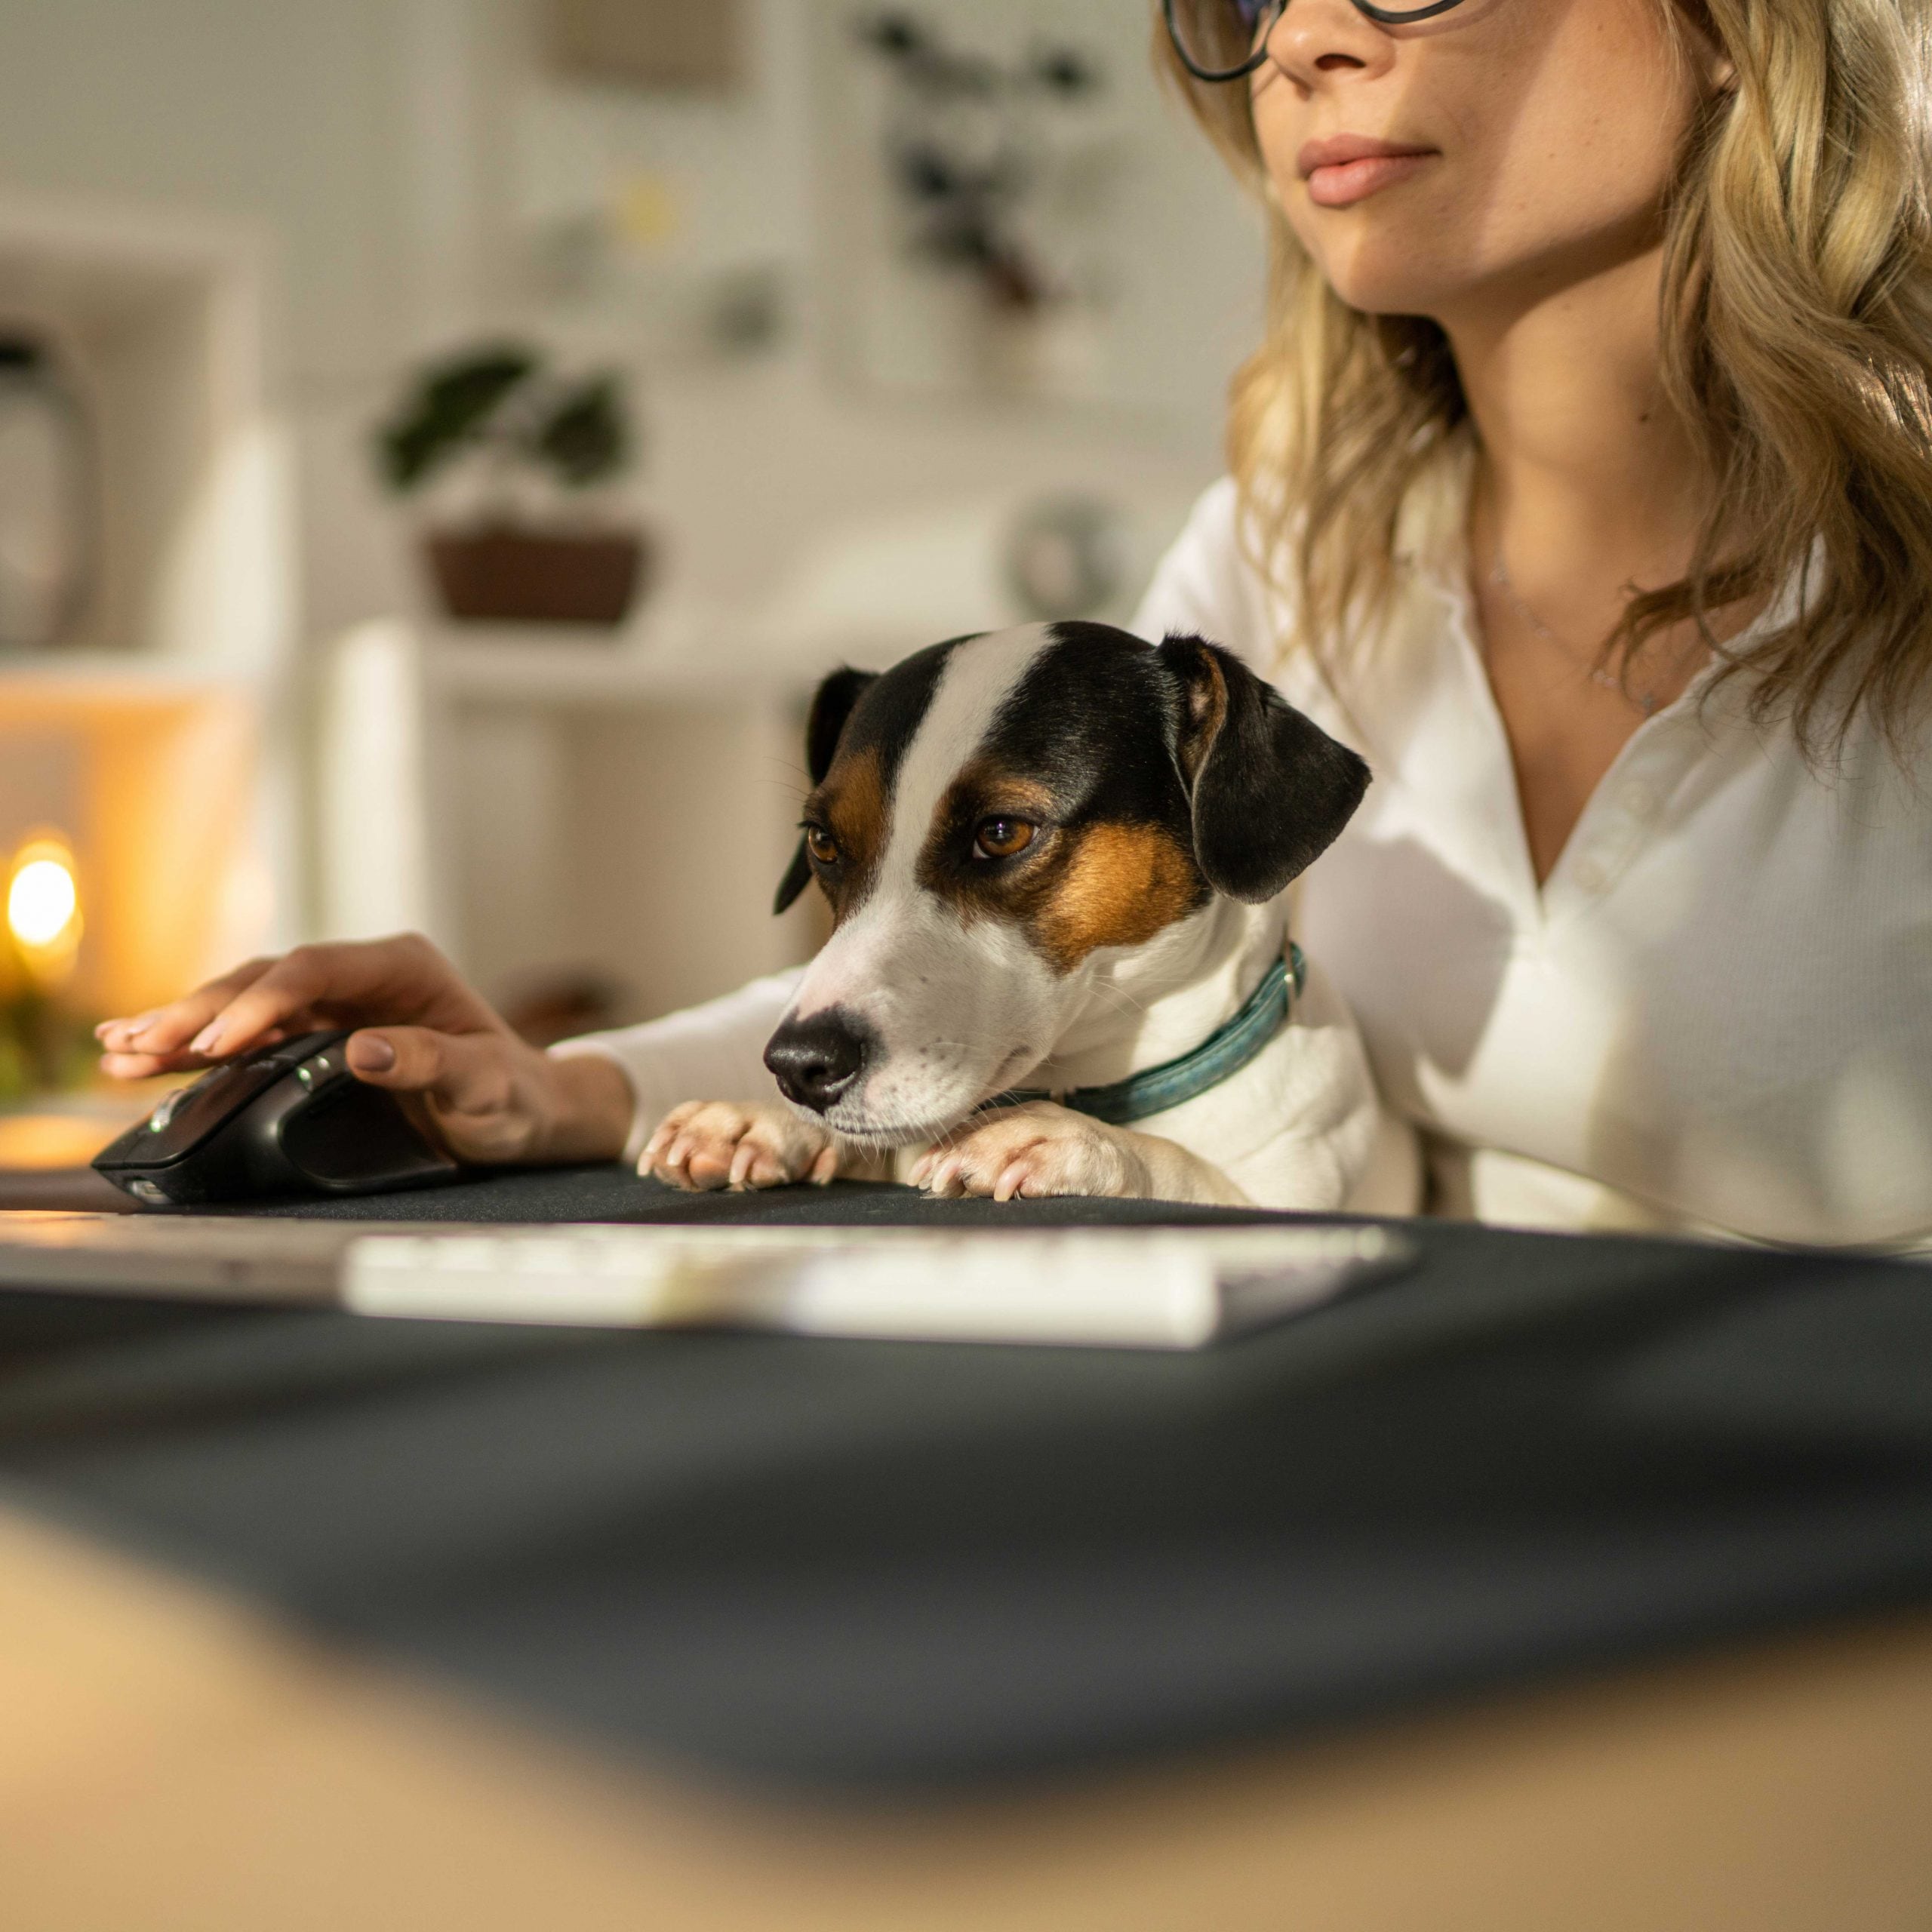 how to comfort a dog with cancer: pet parent on computer with dog